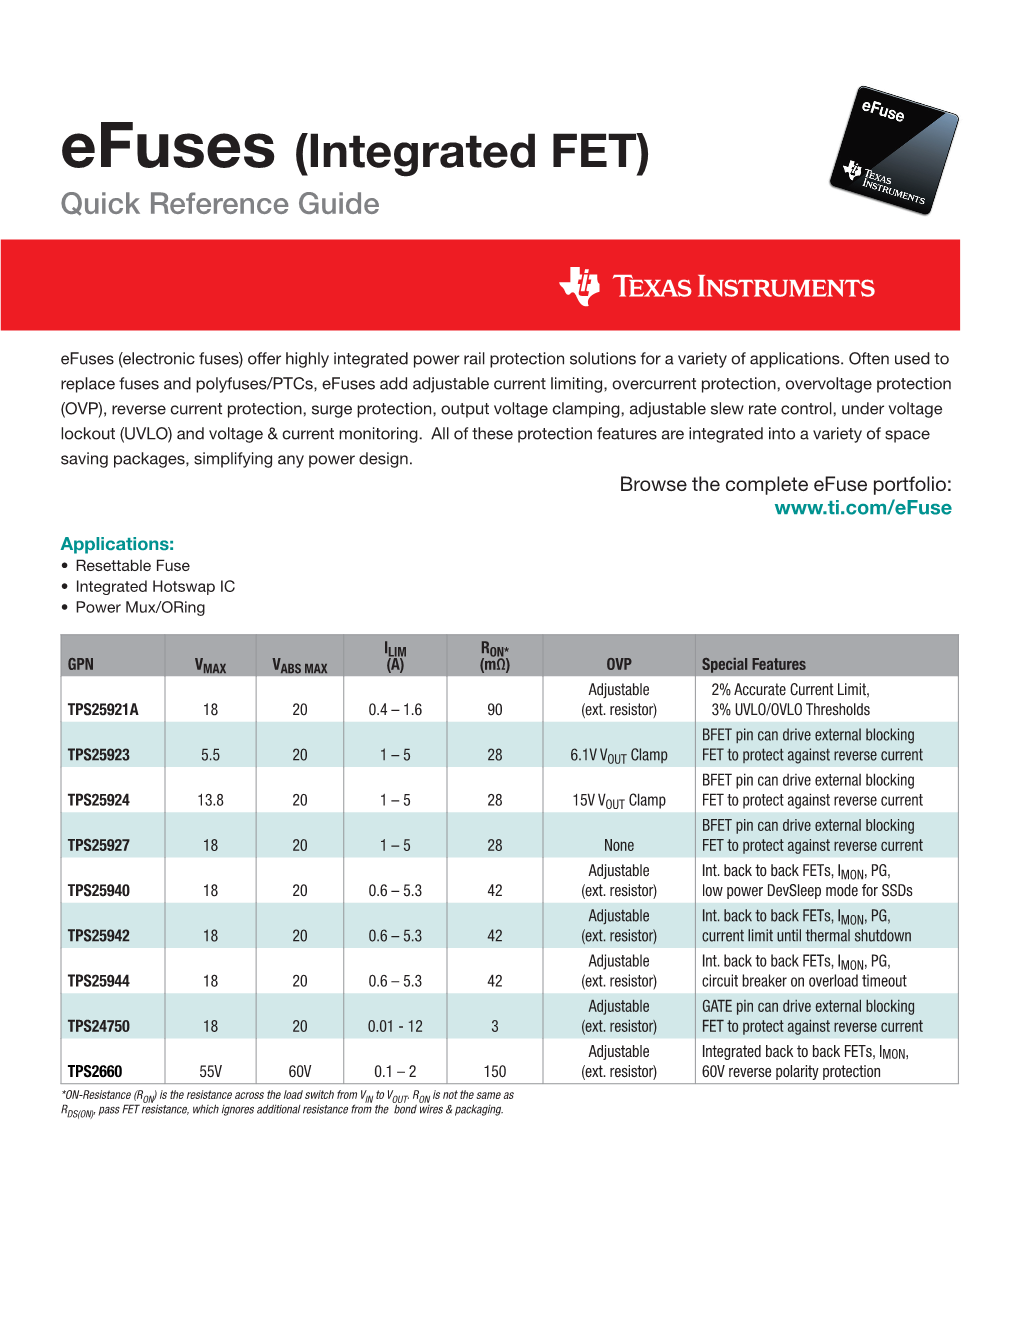 Efuses (Integrated FET) Quick Reference Guide